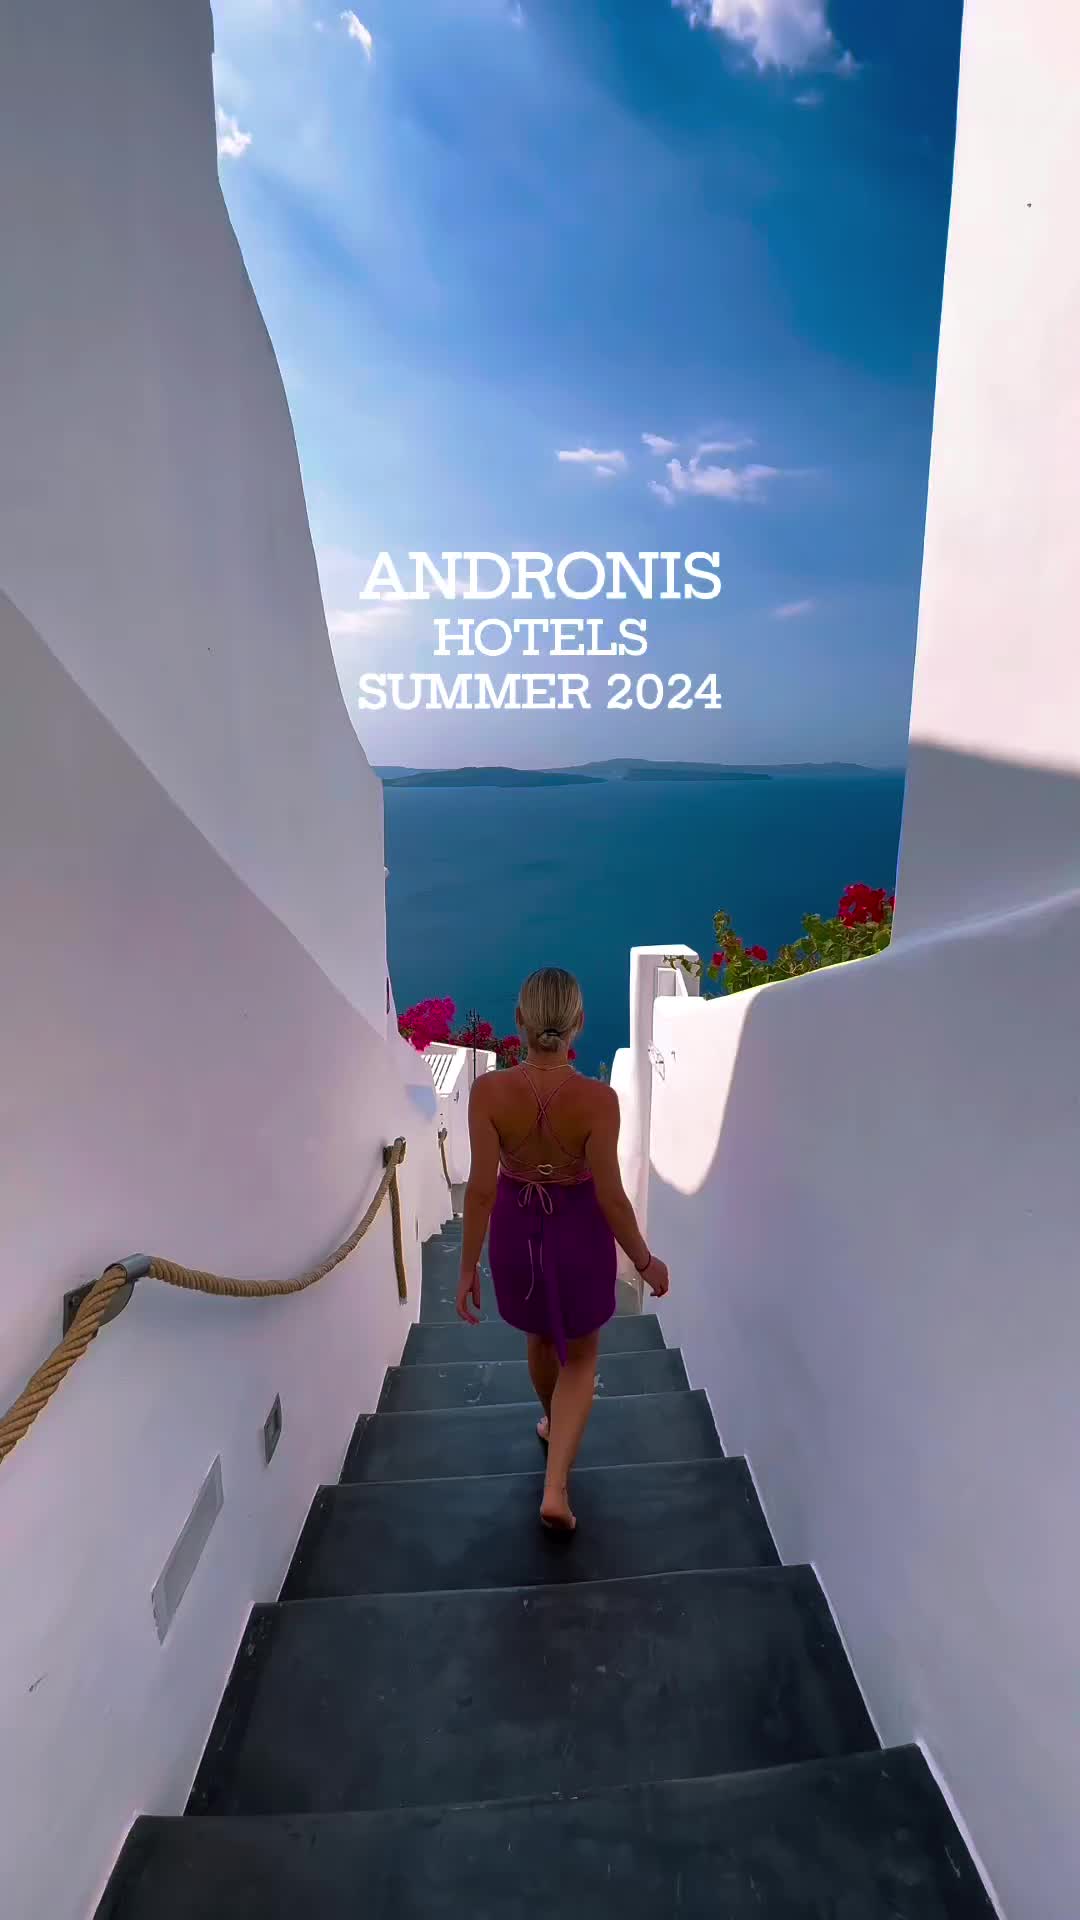 Welcome to Andronis Experience 🇬🇷

_________________
#andronis #andronisluxurysuites #andronisluxurysuites #andronisexperience #andronisboutiquehotel #andronisconcept #santorini #altamarebyandronis #feelalive #greece #greekislands #luxury